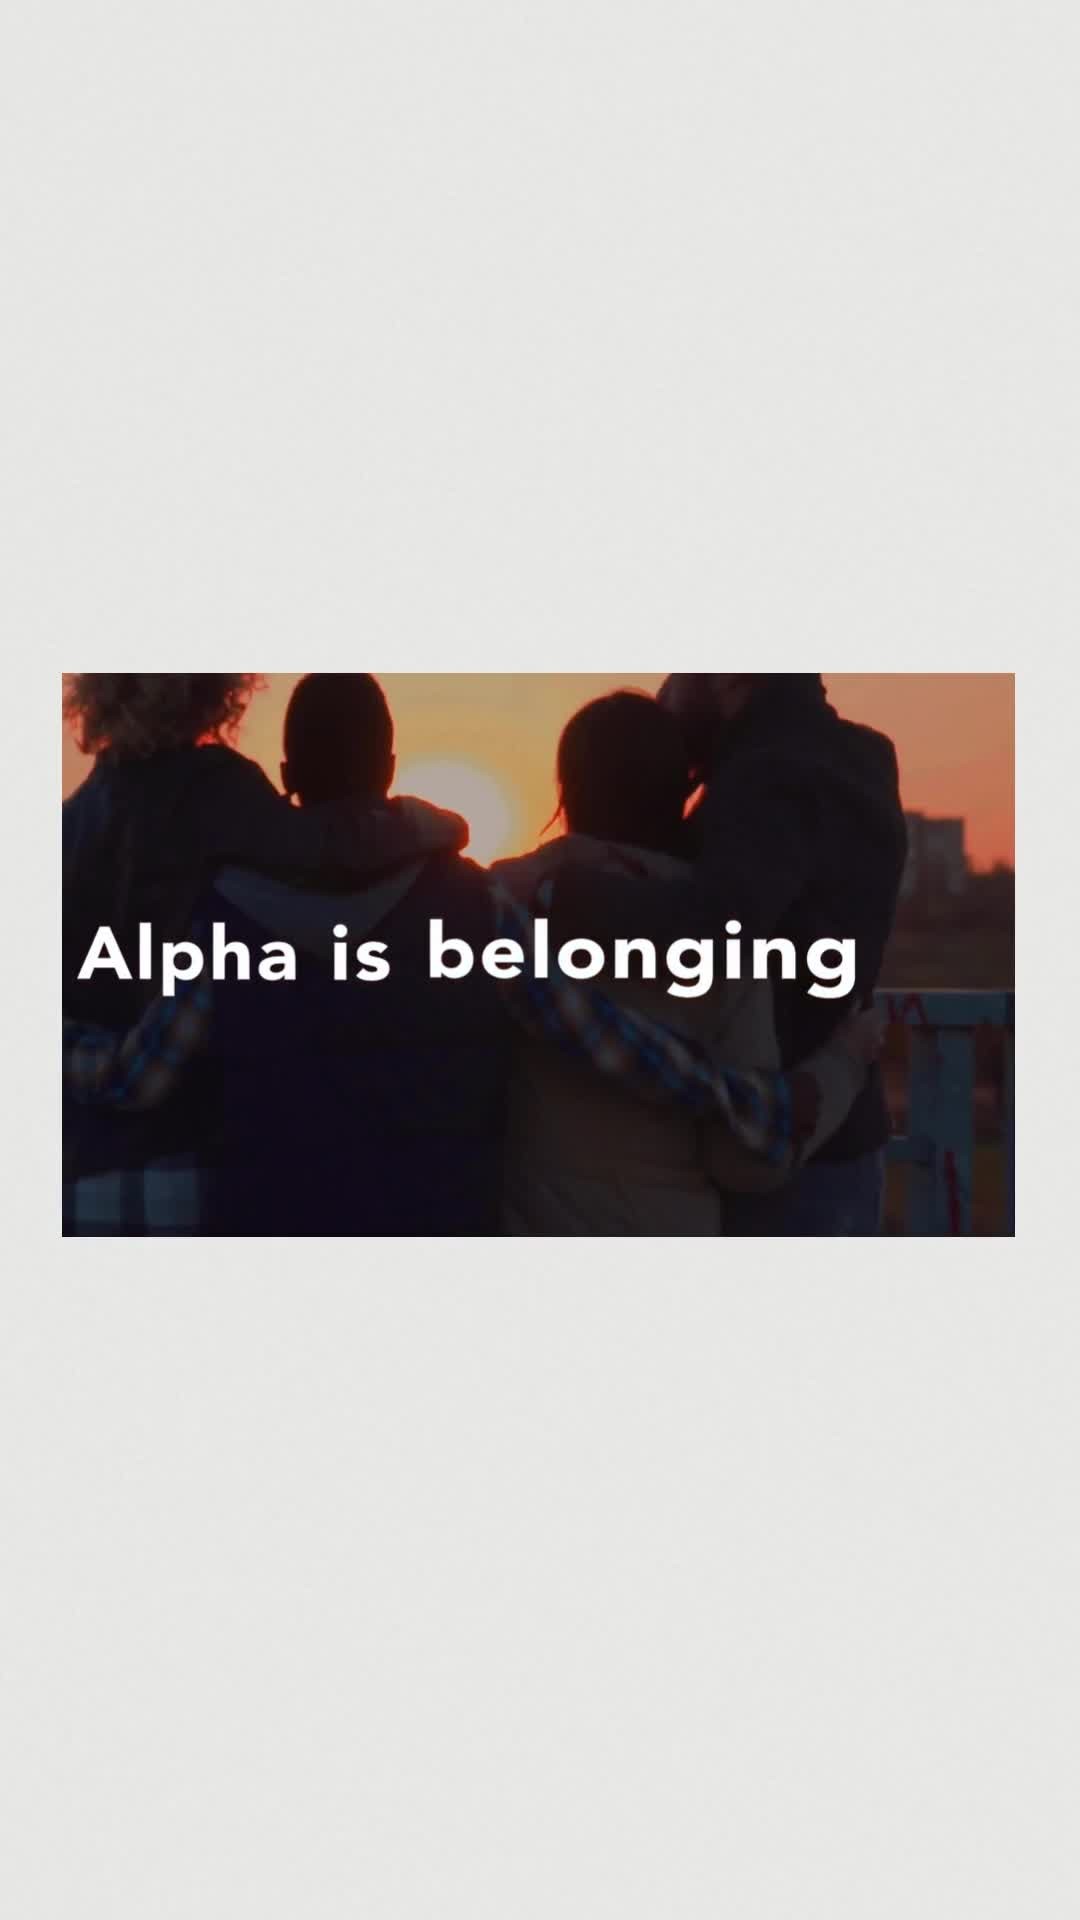 Alpha Online: an opportunity for anyone, anywhere to go online for a weekly discussion of the big questions of life. 

#TryAlpha beginning September 14. 

Sign up, volunteer or learn more through the link in our bio.